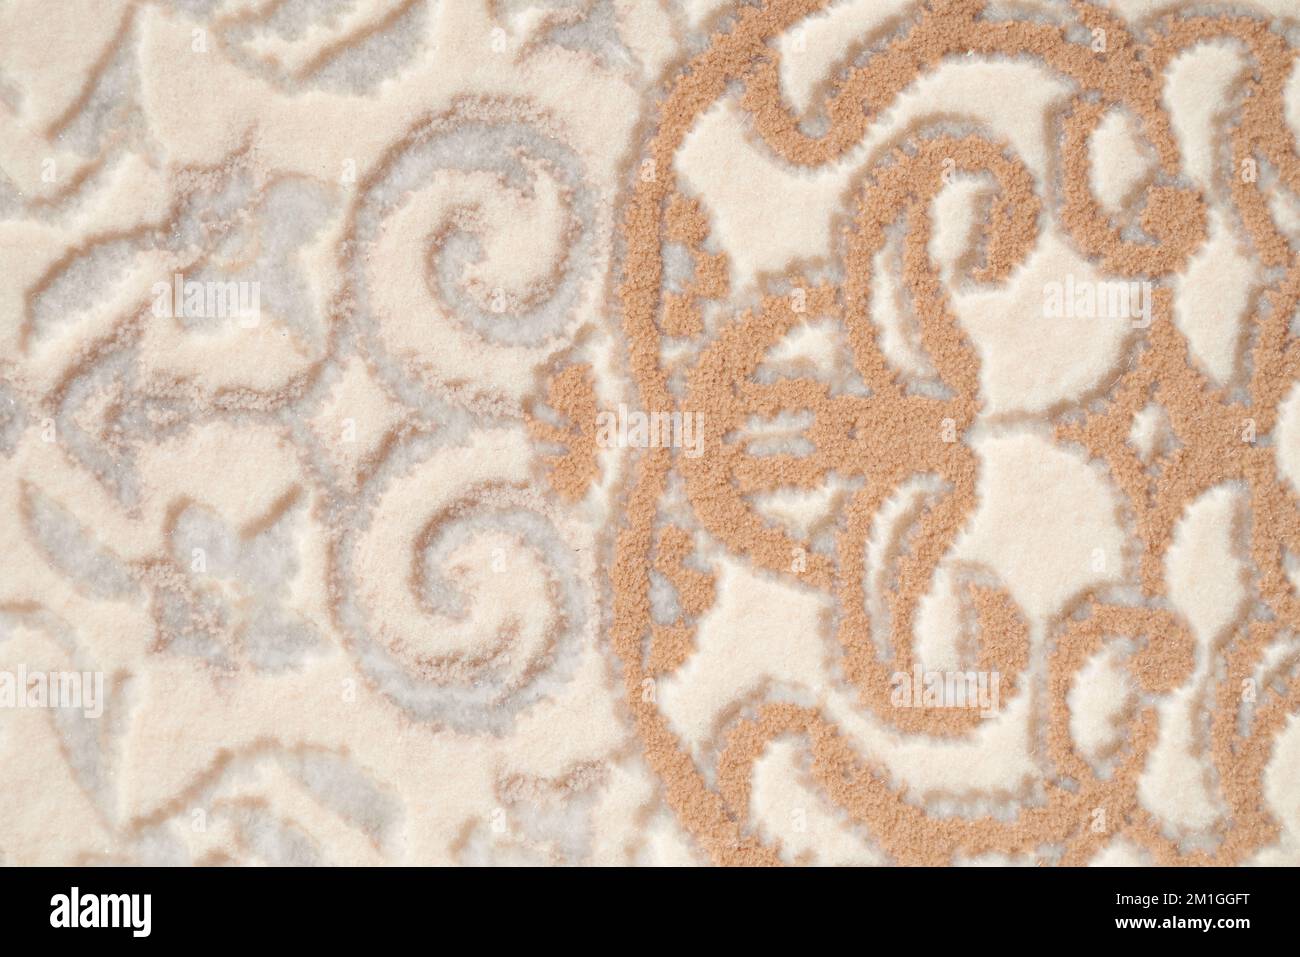 Fragment of decorative carpet fabric pattern, background photo texture. Close up of geometric beige and white short pile carpet ornament. Backgrounds and textures concept. Stock Photo